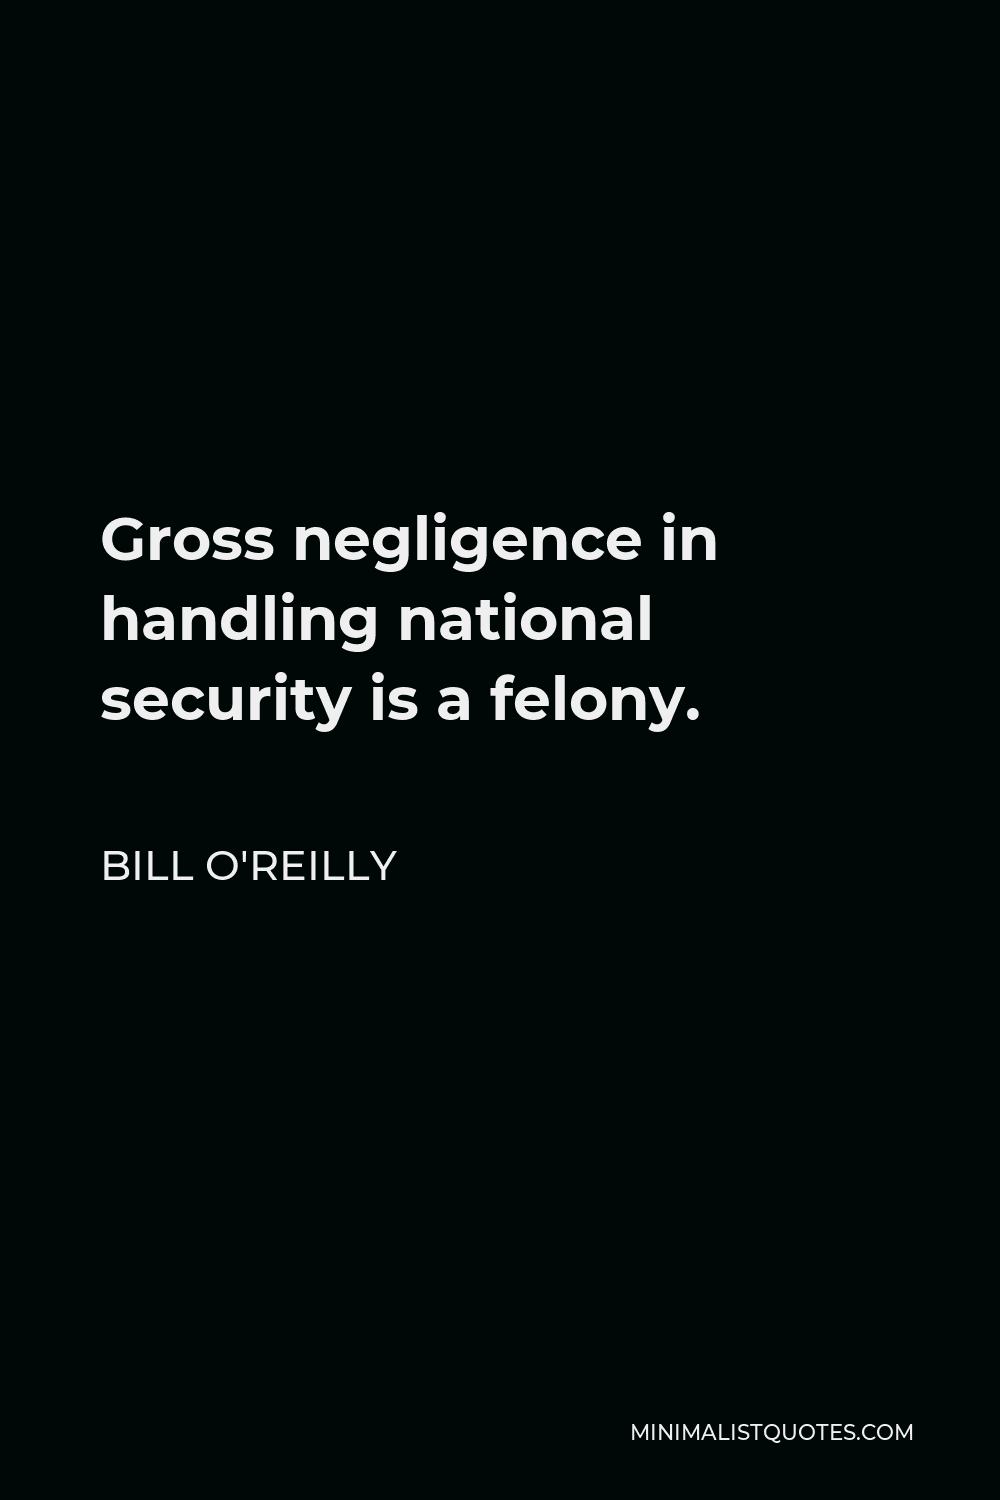 Bill O'Reilly Quote - Gross negligence in handling national security is a felony.